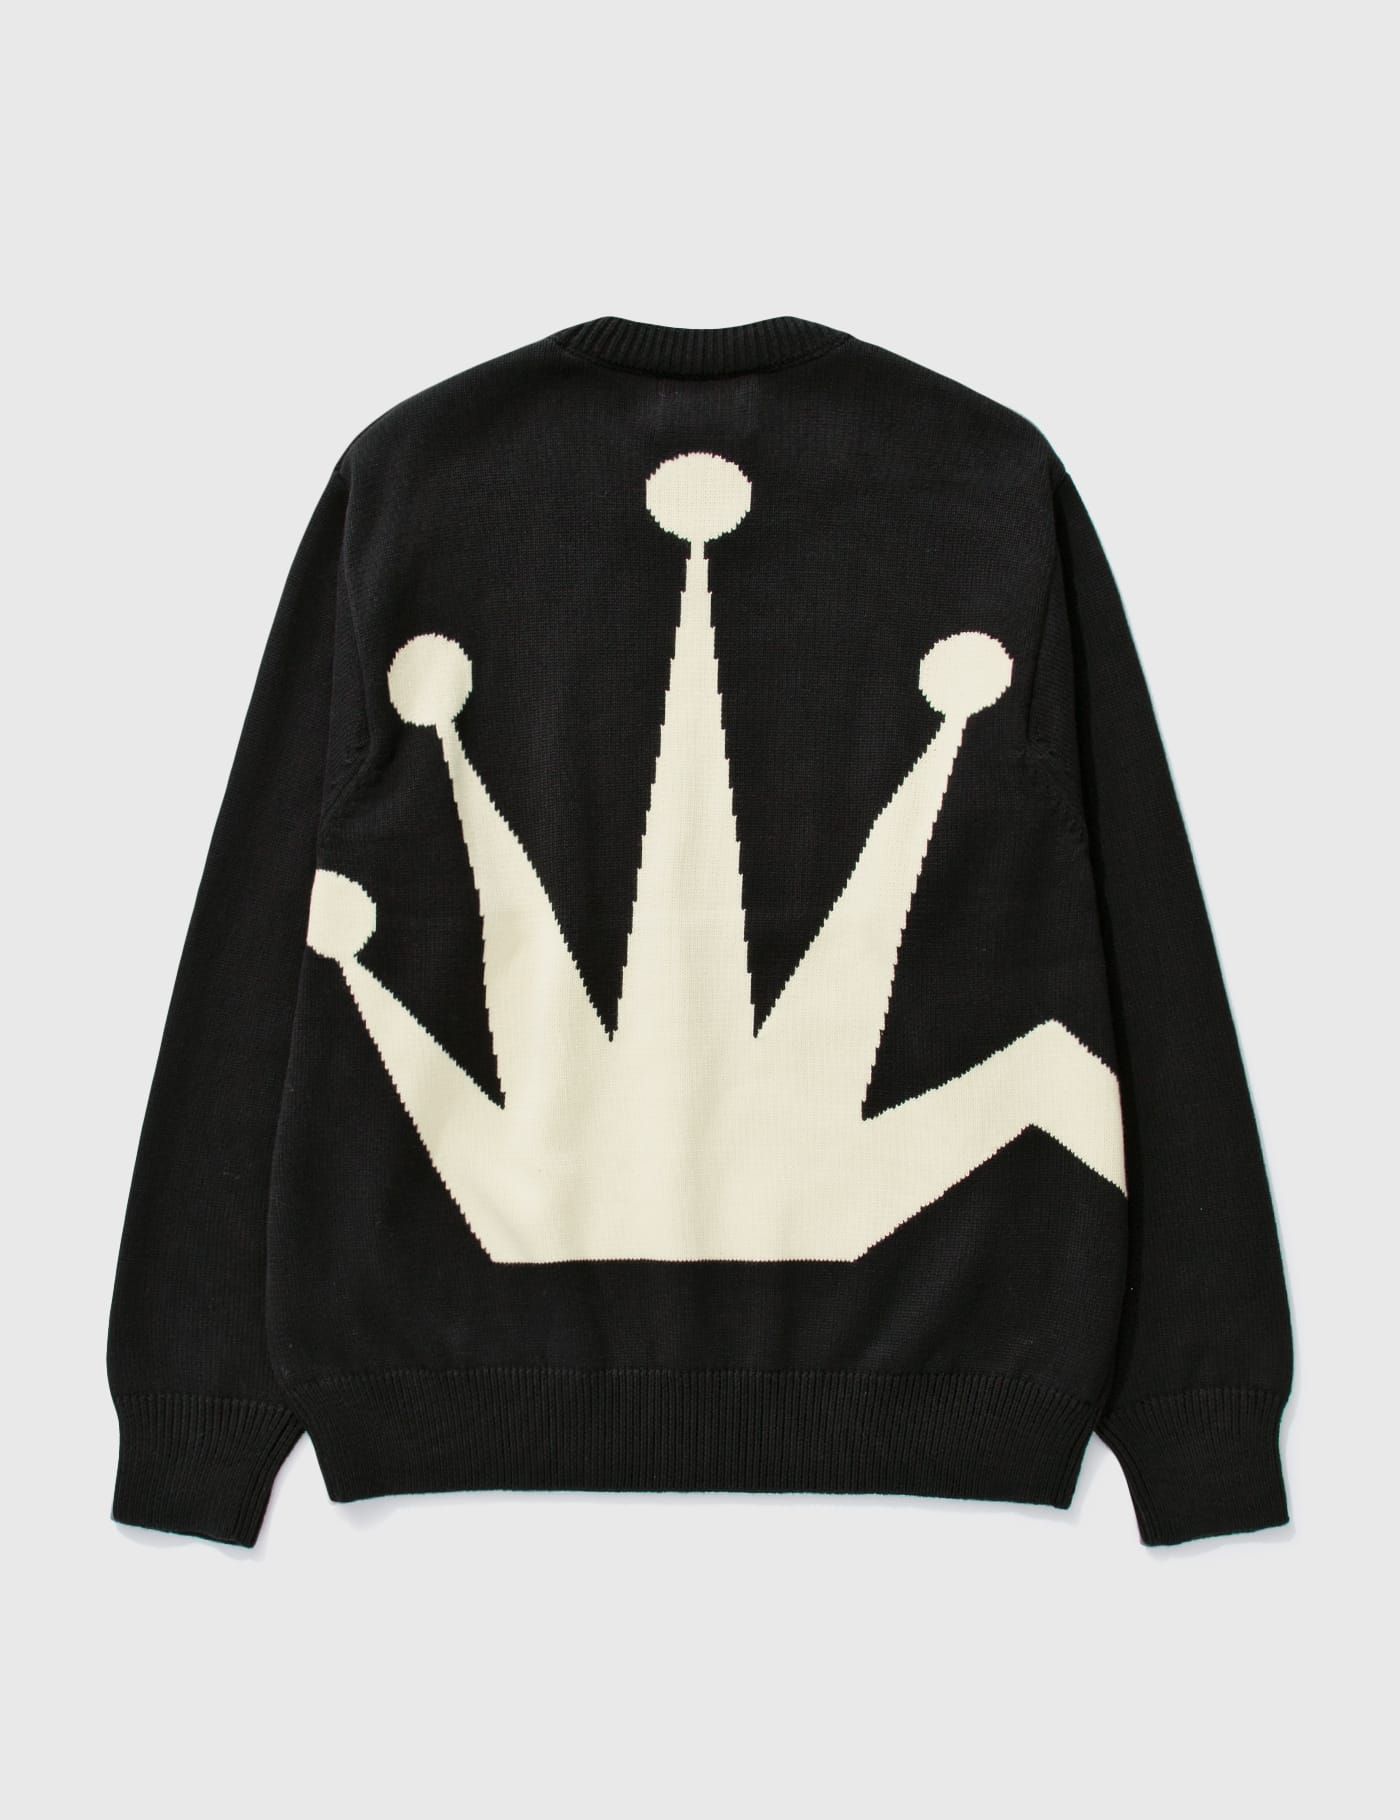 Stüssy - Bent Crown Sweater | HBX - Globally Curated Fashion and 